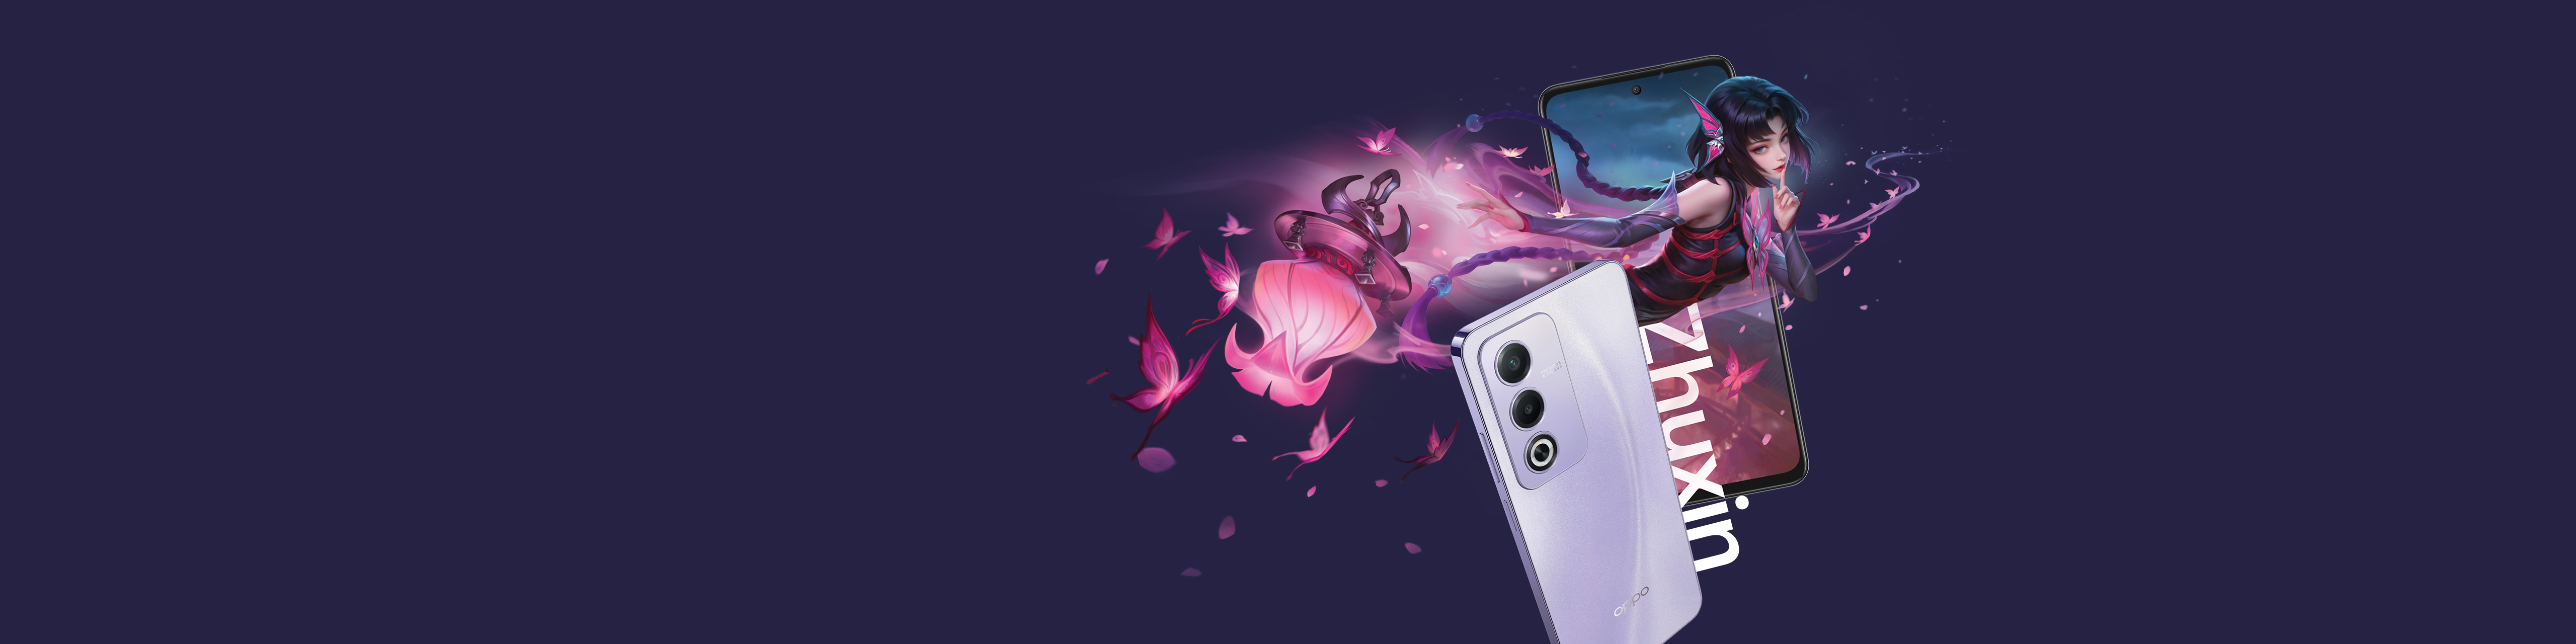 OPPO A3 Pro<sup>5G<sup>